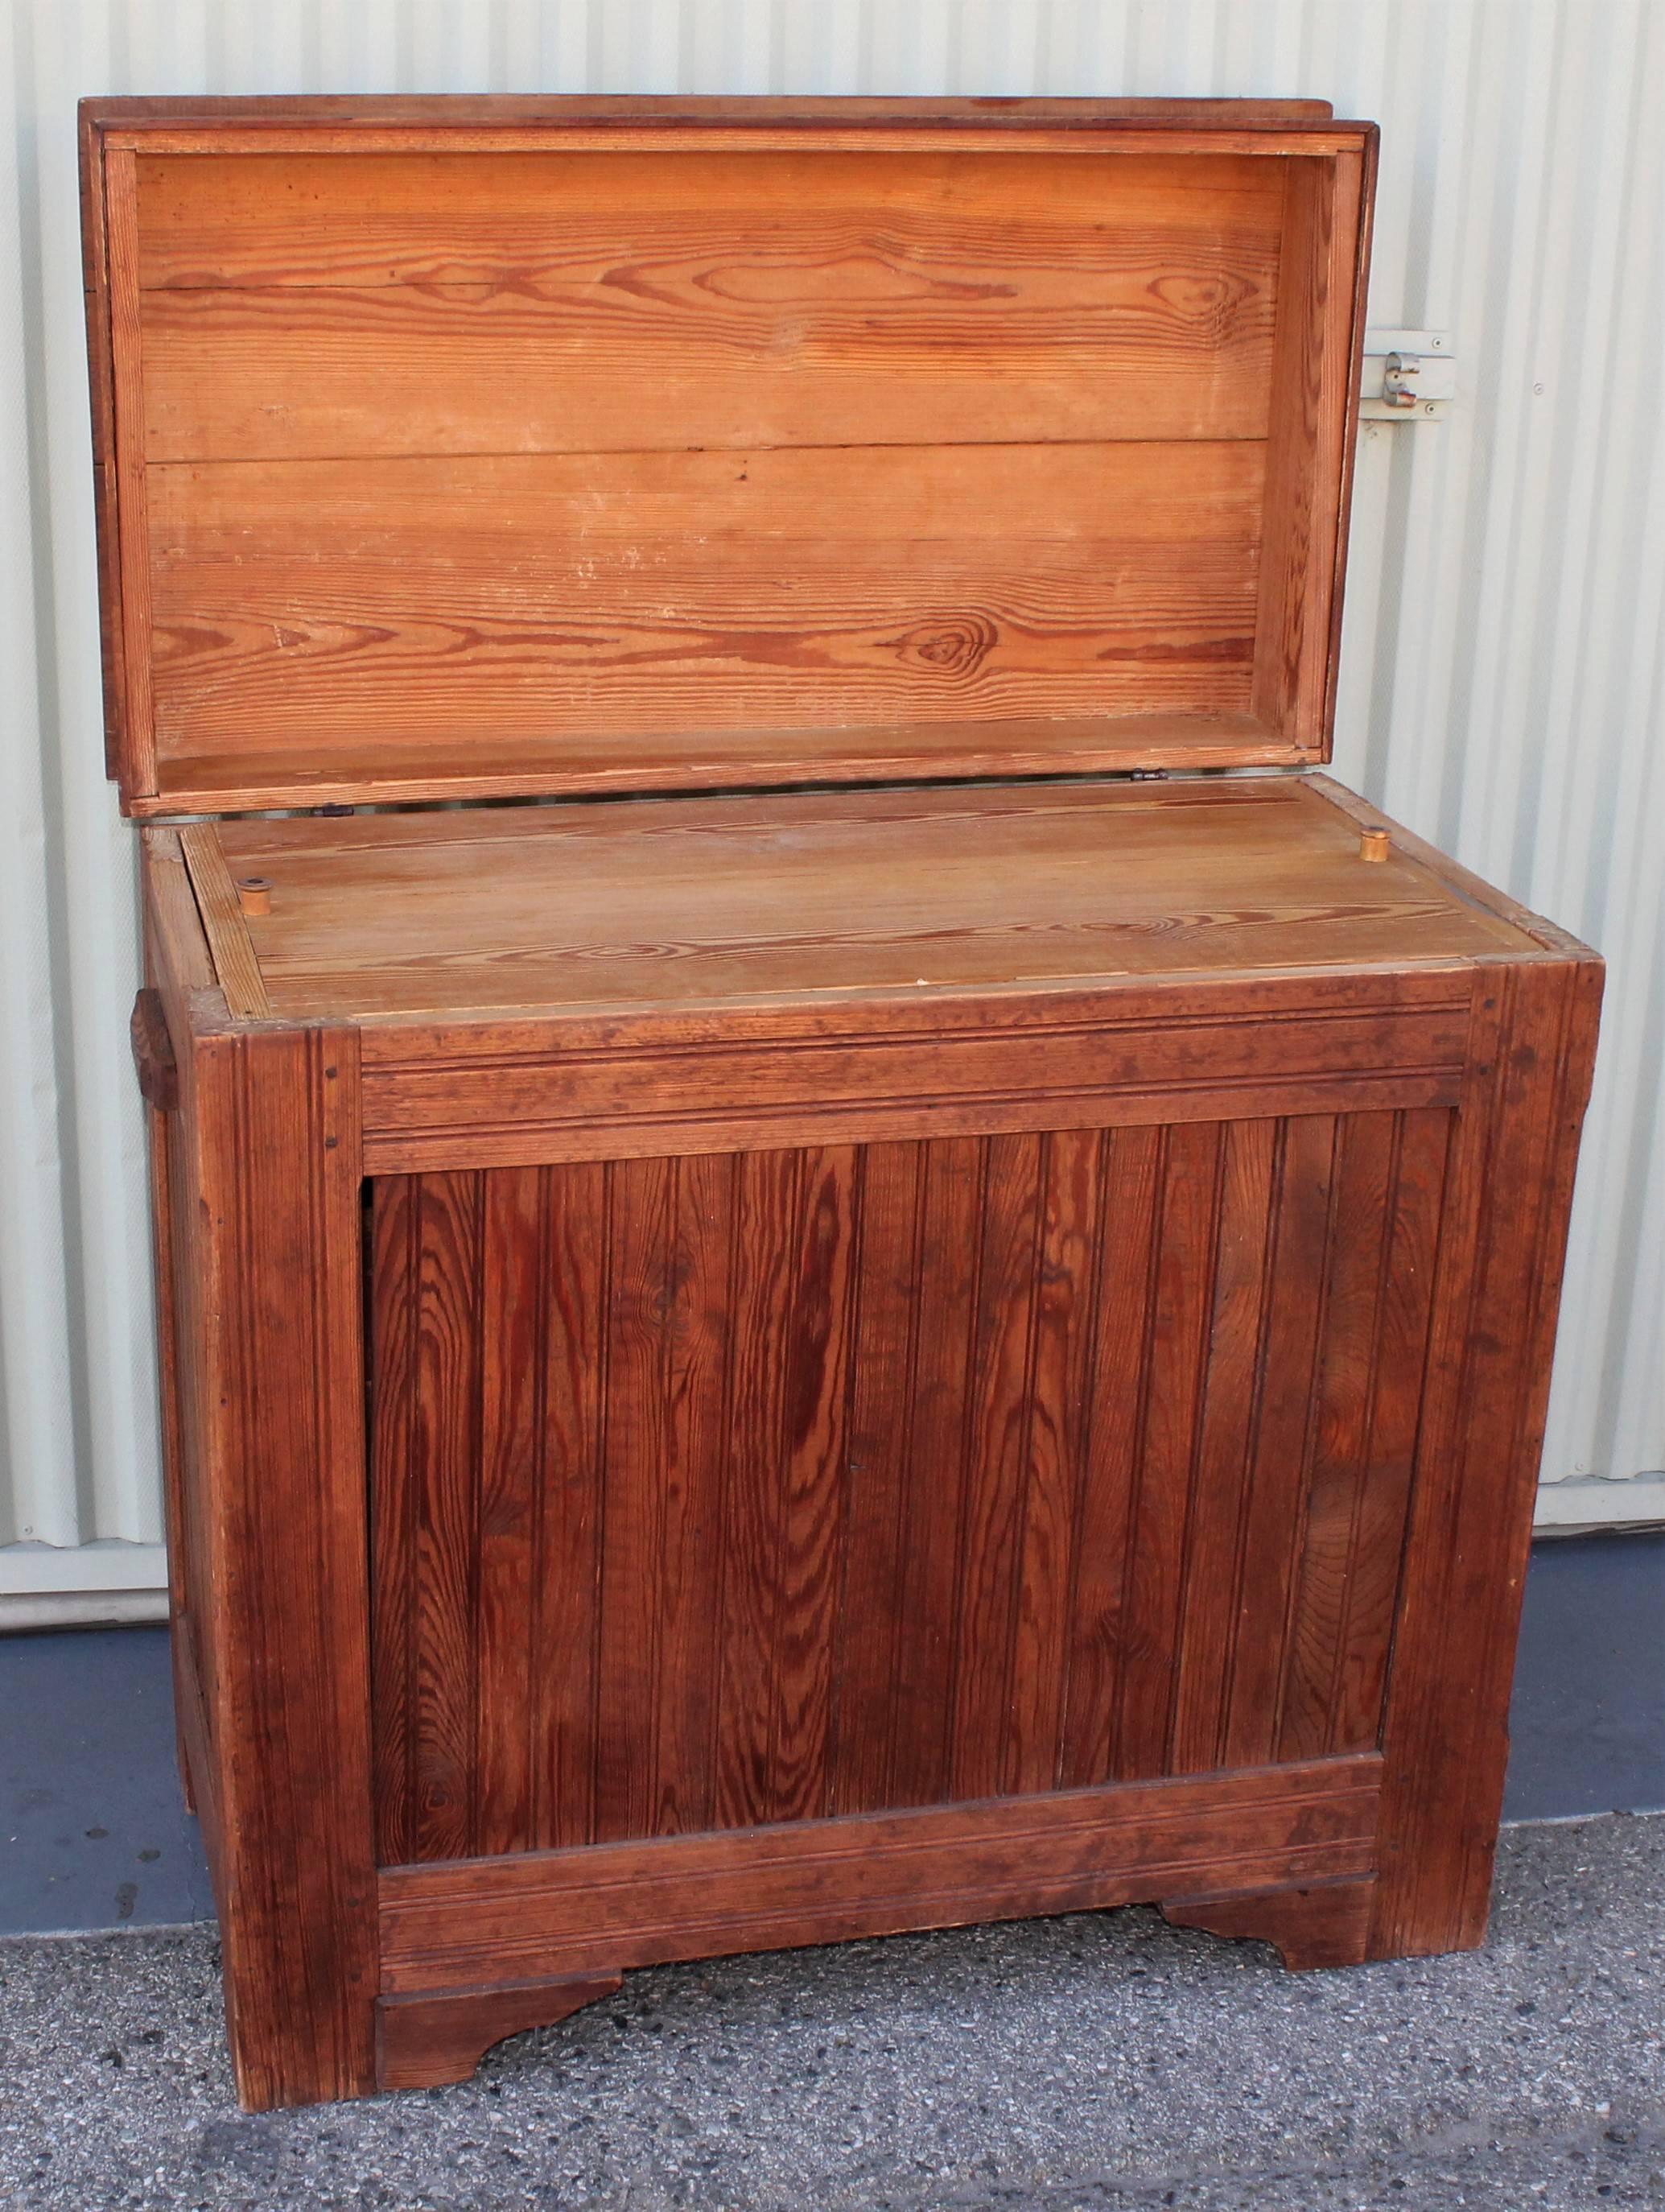 19th century raw pine with a Fine patina from age, this flour bin has a cool lift top with inlaid dough board or cutting board. The sides have handles for lifting or moving around. The condition is very good. This bin looks like the mid west.